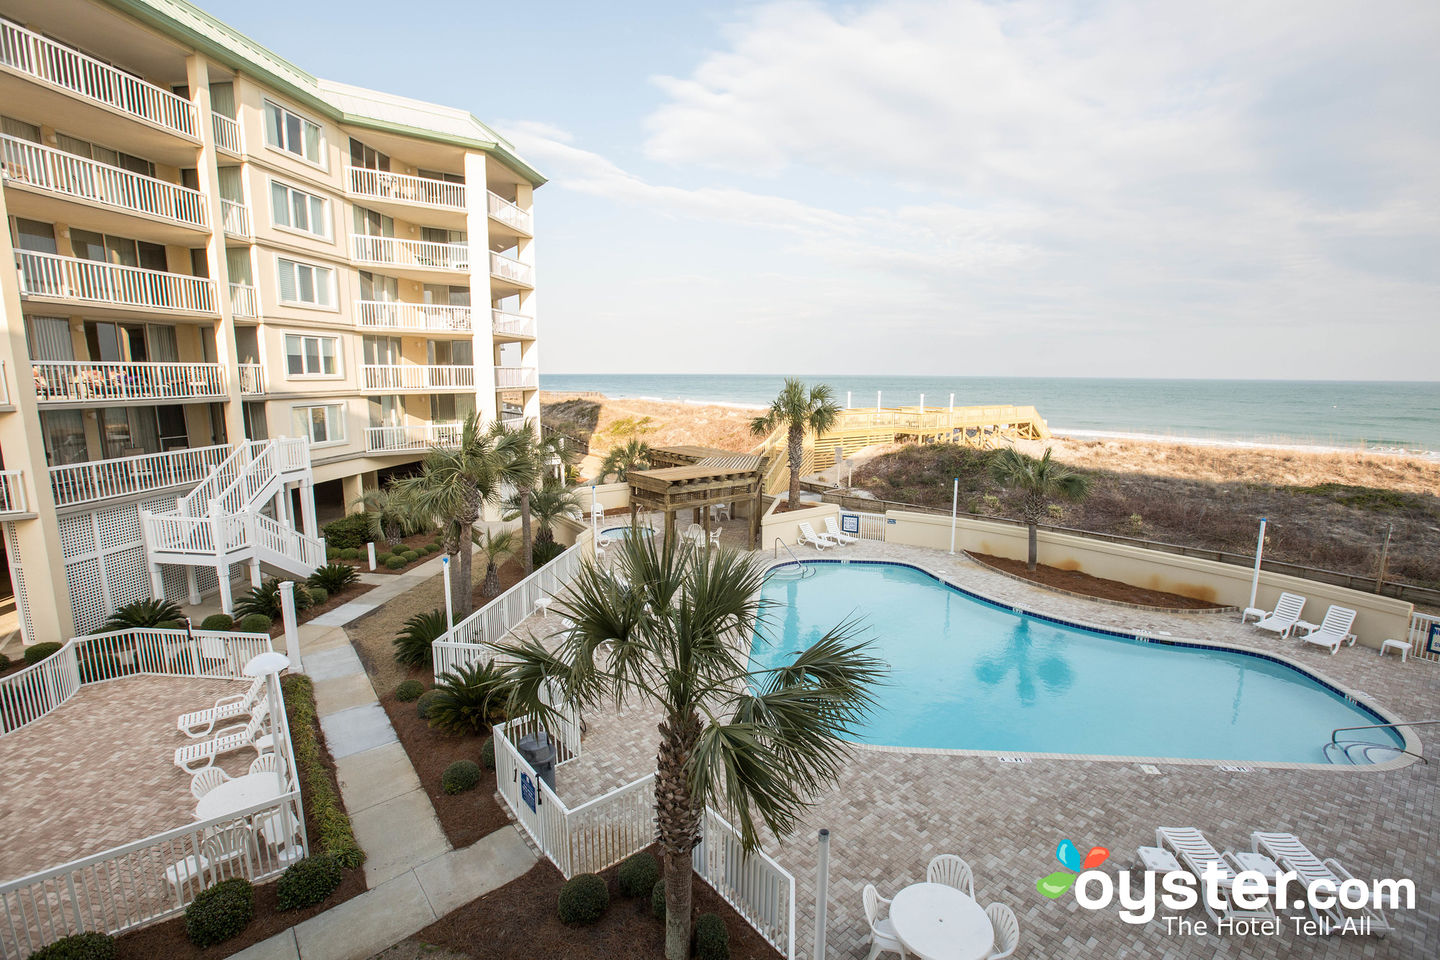 Litchfield Beach & Golf Resort Review: What To REALLY Expect If You Stay